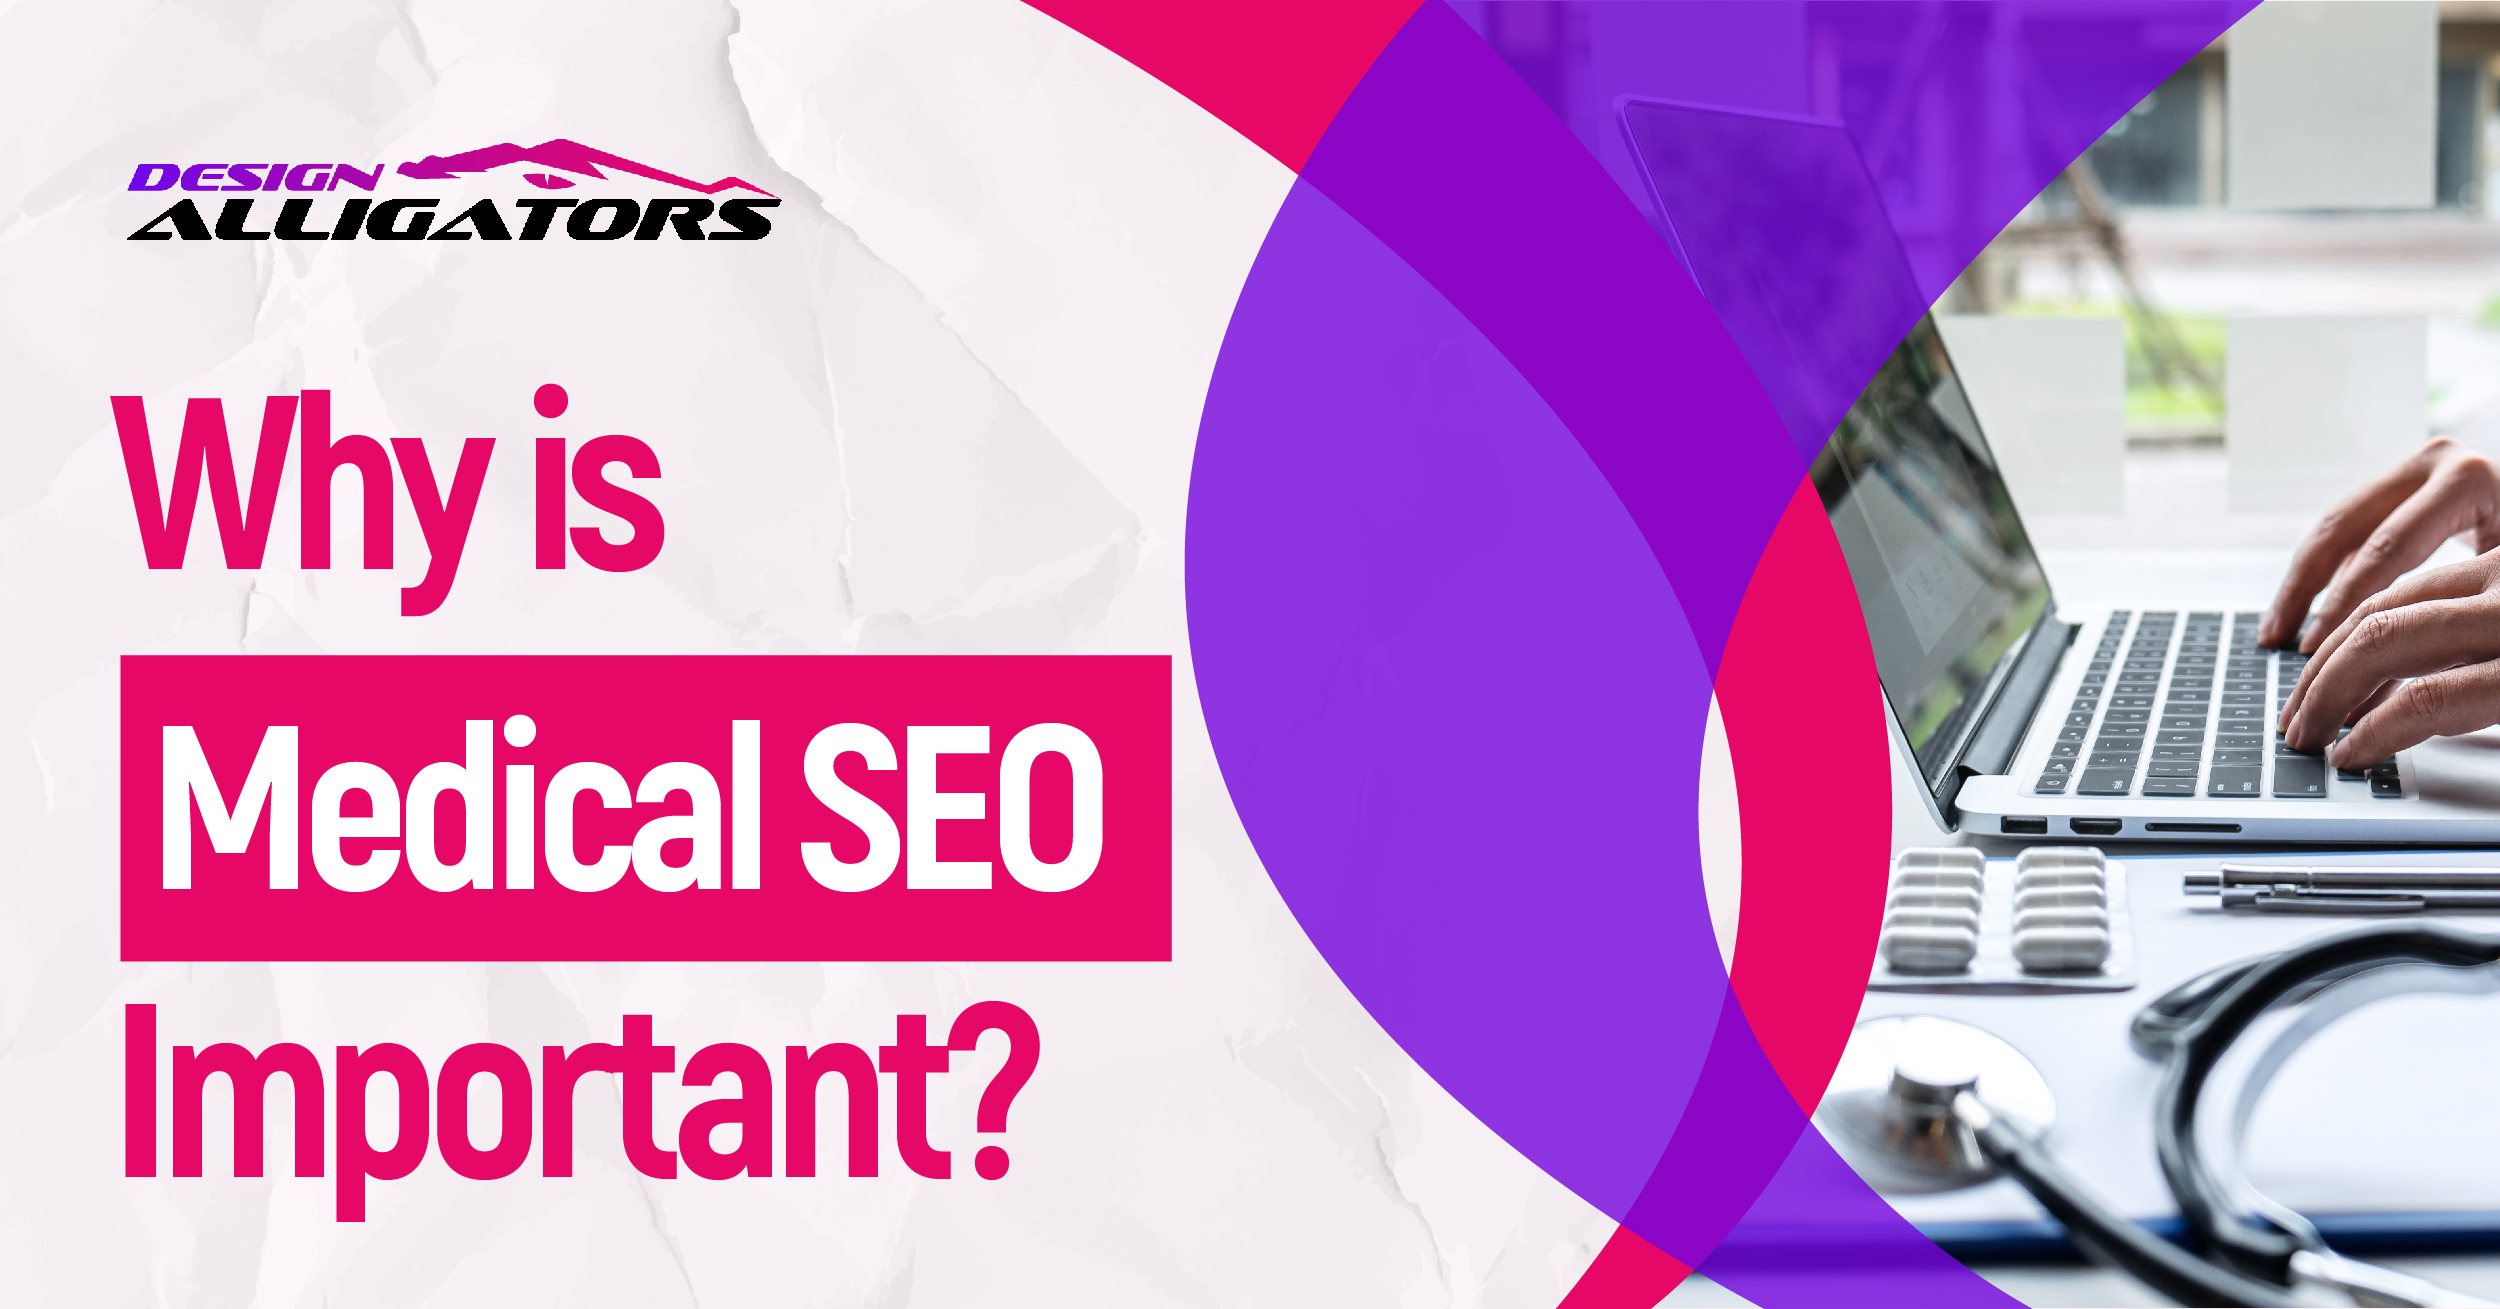 Why is Medical SEO Important?